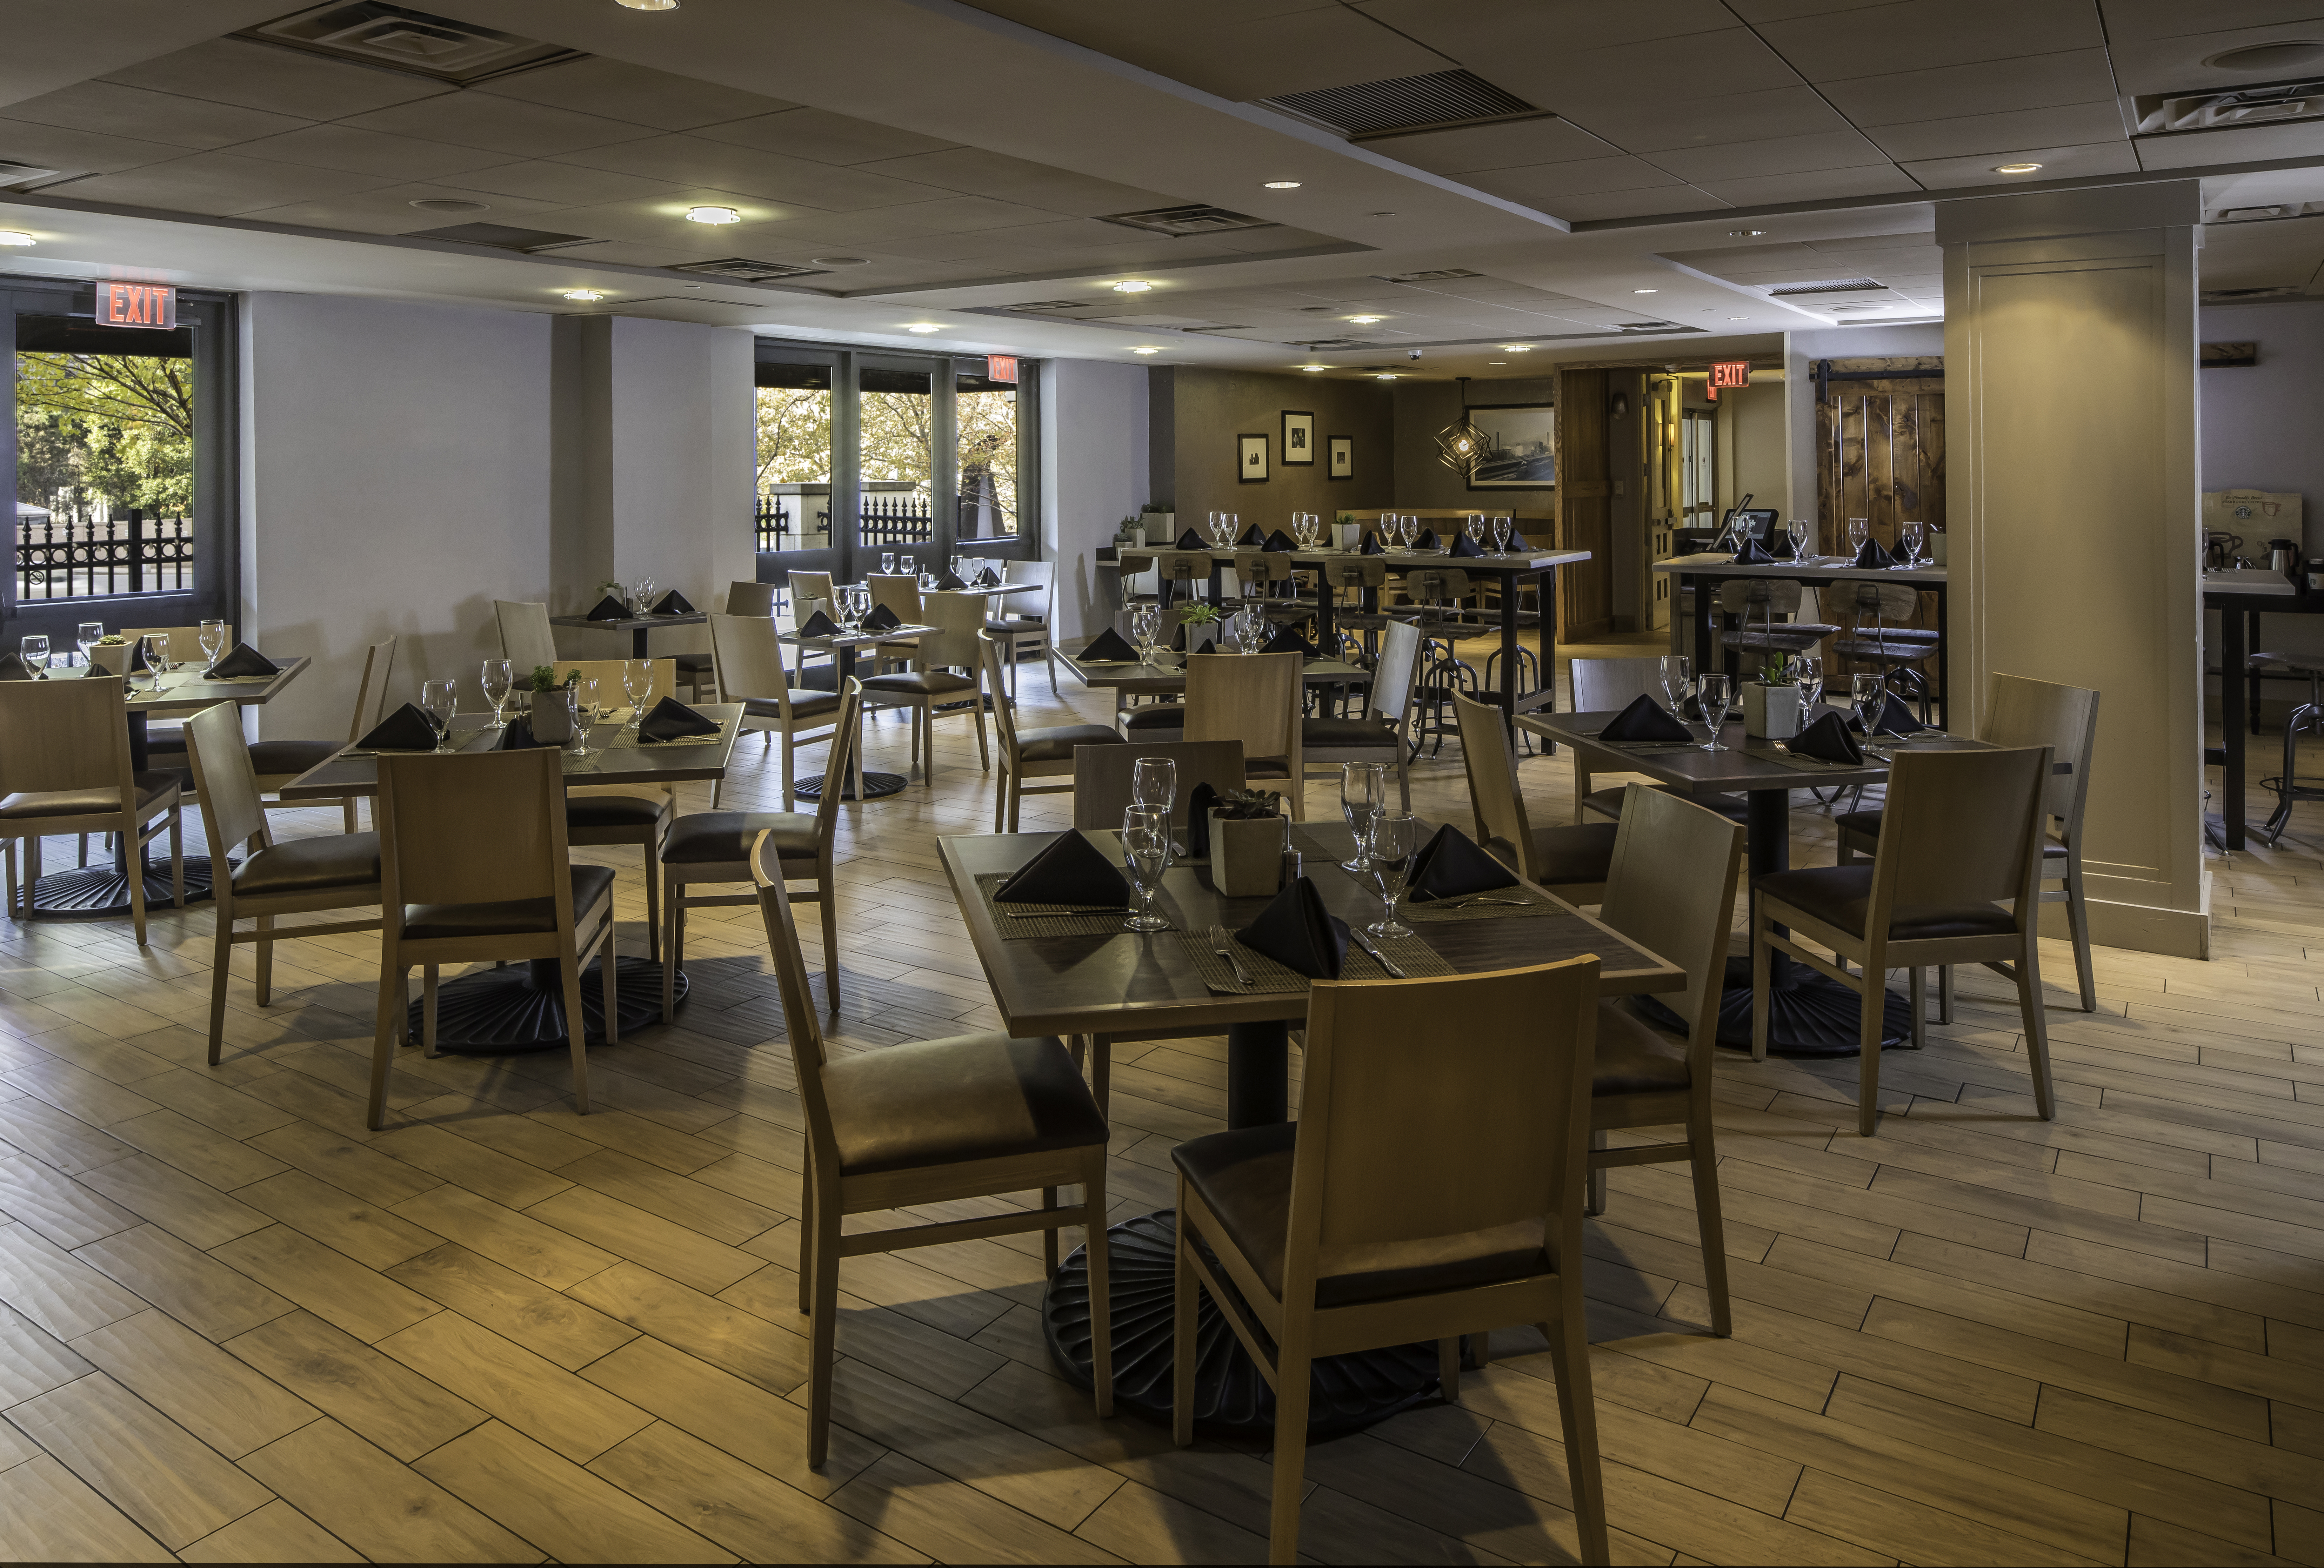 Windows, Glass Doors, Folded Black Napkins, Silverware, and Drinking Glasses on Dining Tables, Chairs, and Wall Art in Bigelow Grille